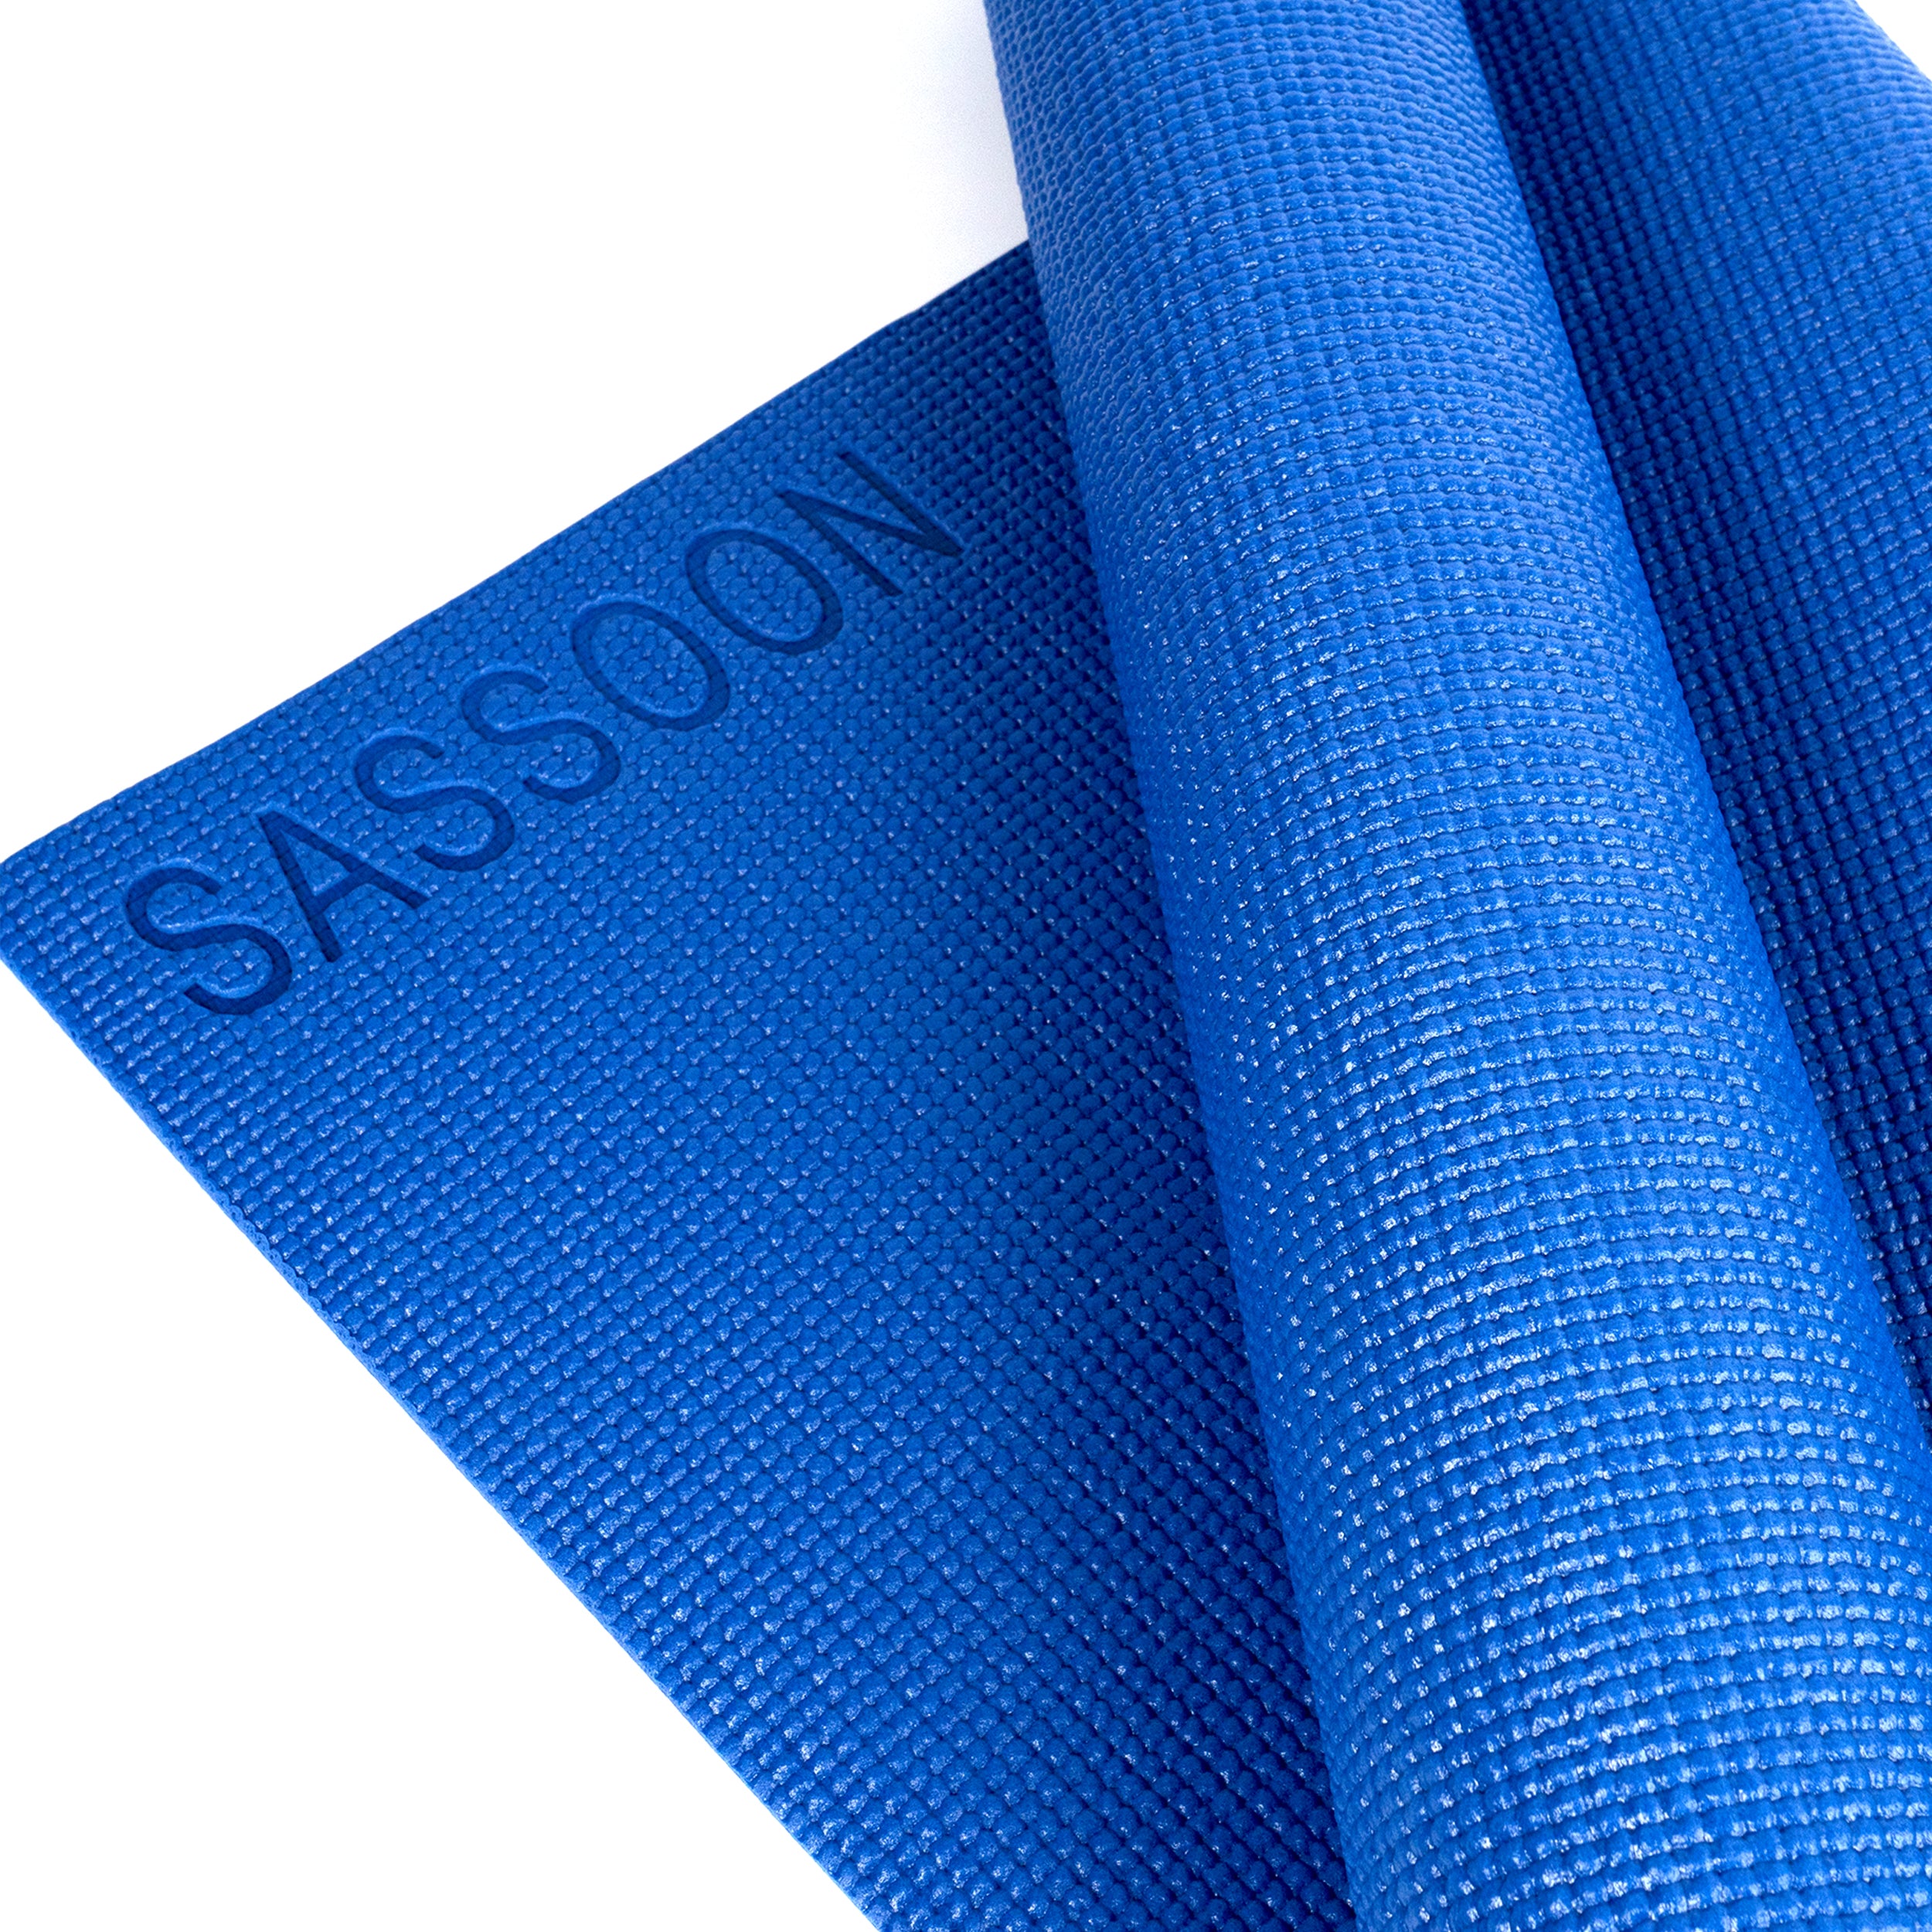 Sasimo Premium Anti Skid with Strap Extra Thick Yoga and Exercise Mat Yoga  Mat 6 mm Pink 6 mm Yoga Mat - Buy Sasimo Premium Anti Skid with Strap Extra Thick  Yoga